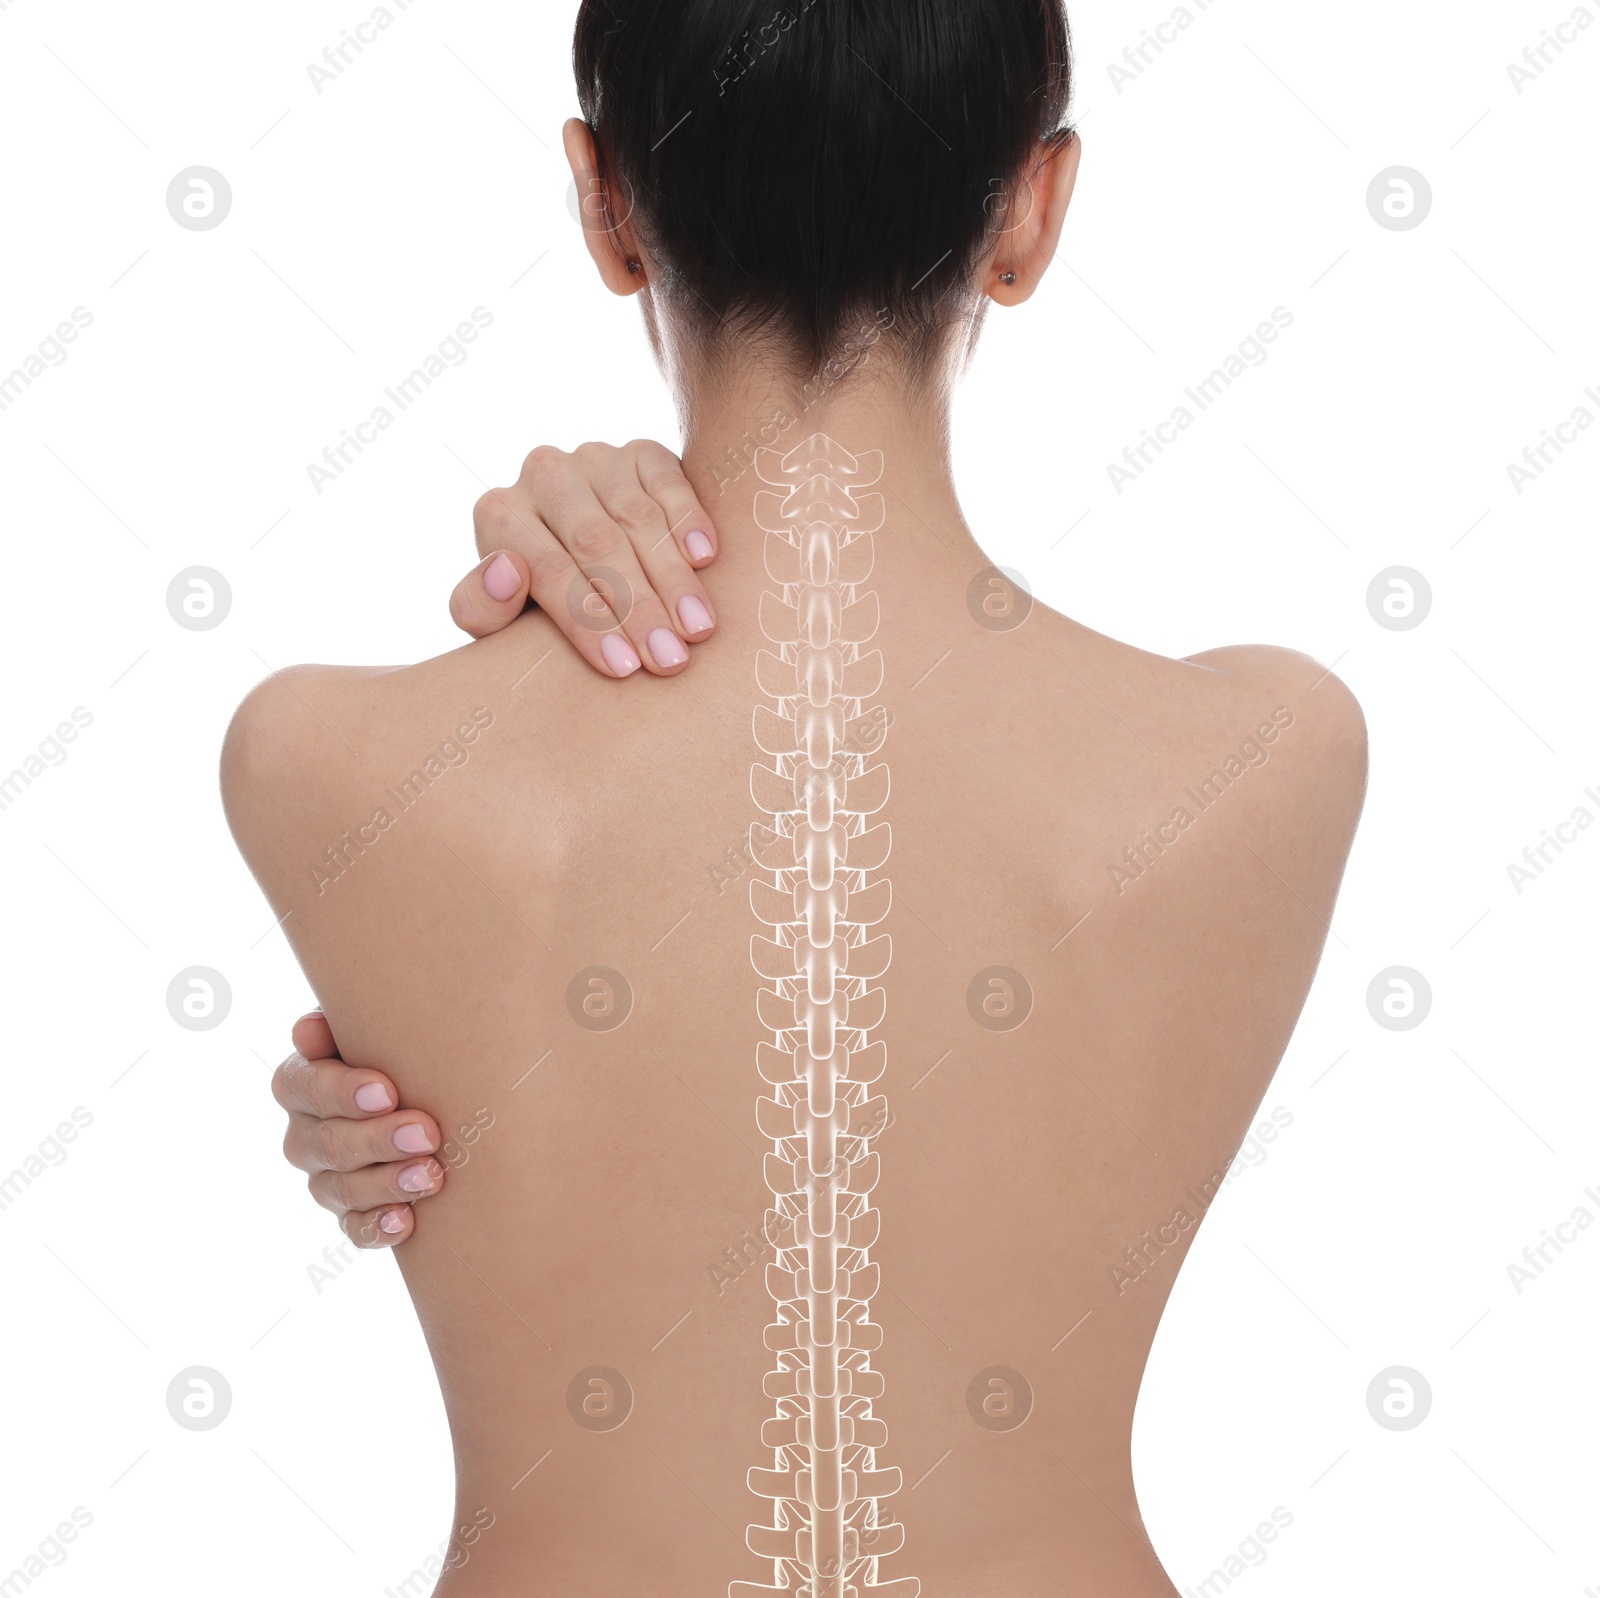 Image of Woman with healthy back on white background. Illustration of spine